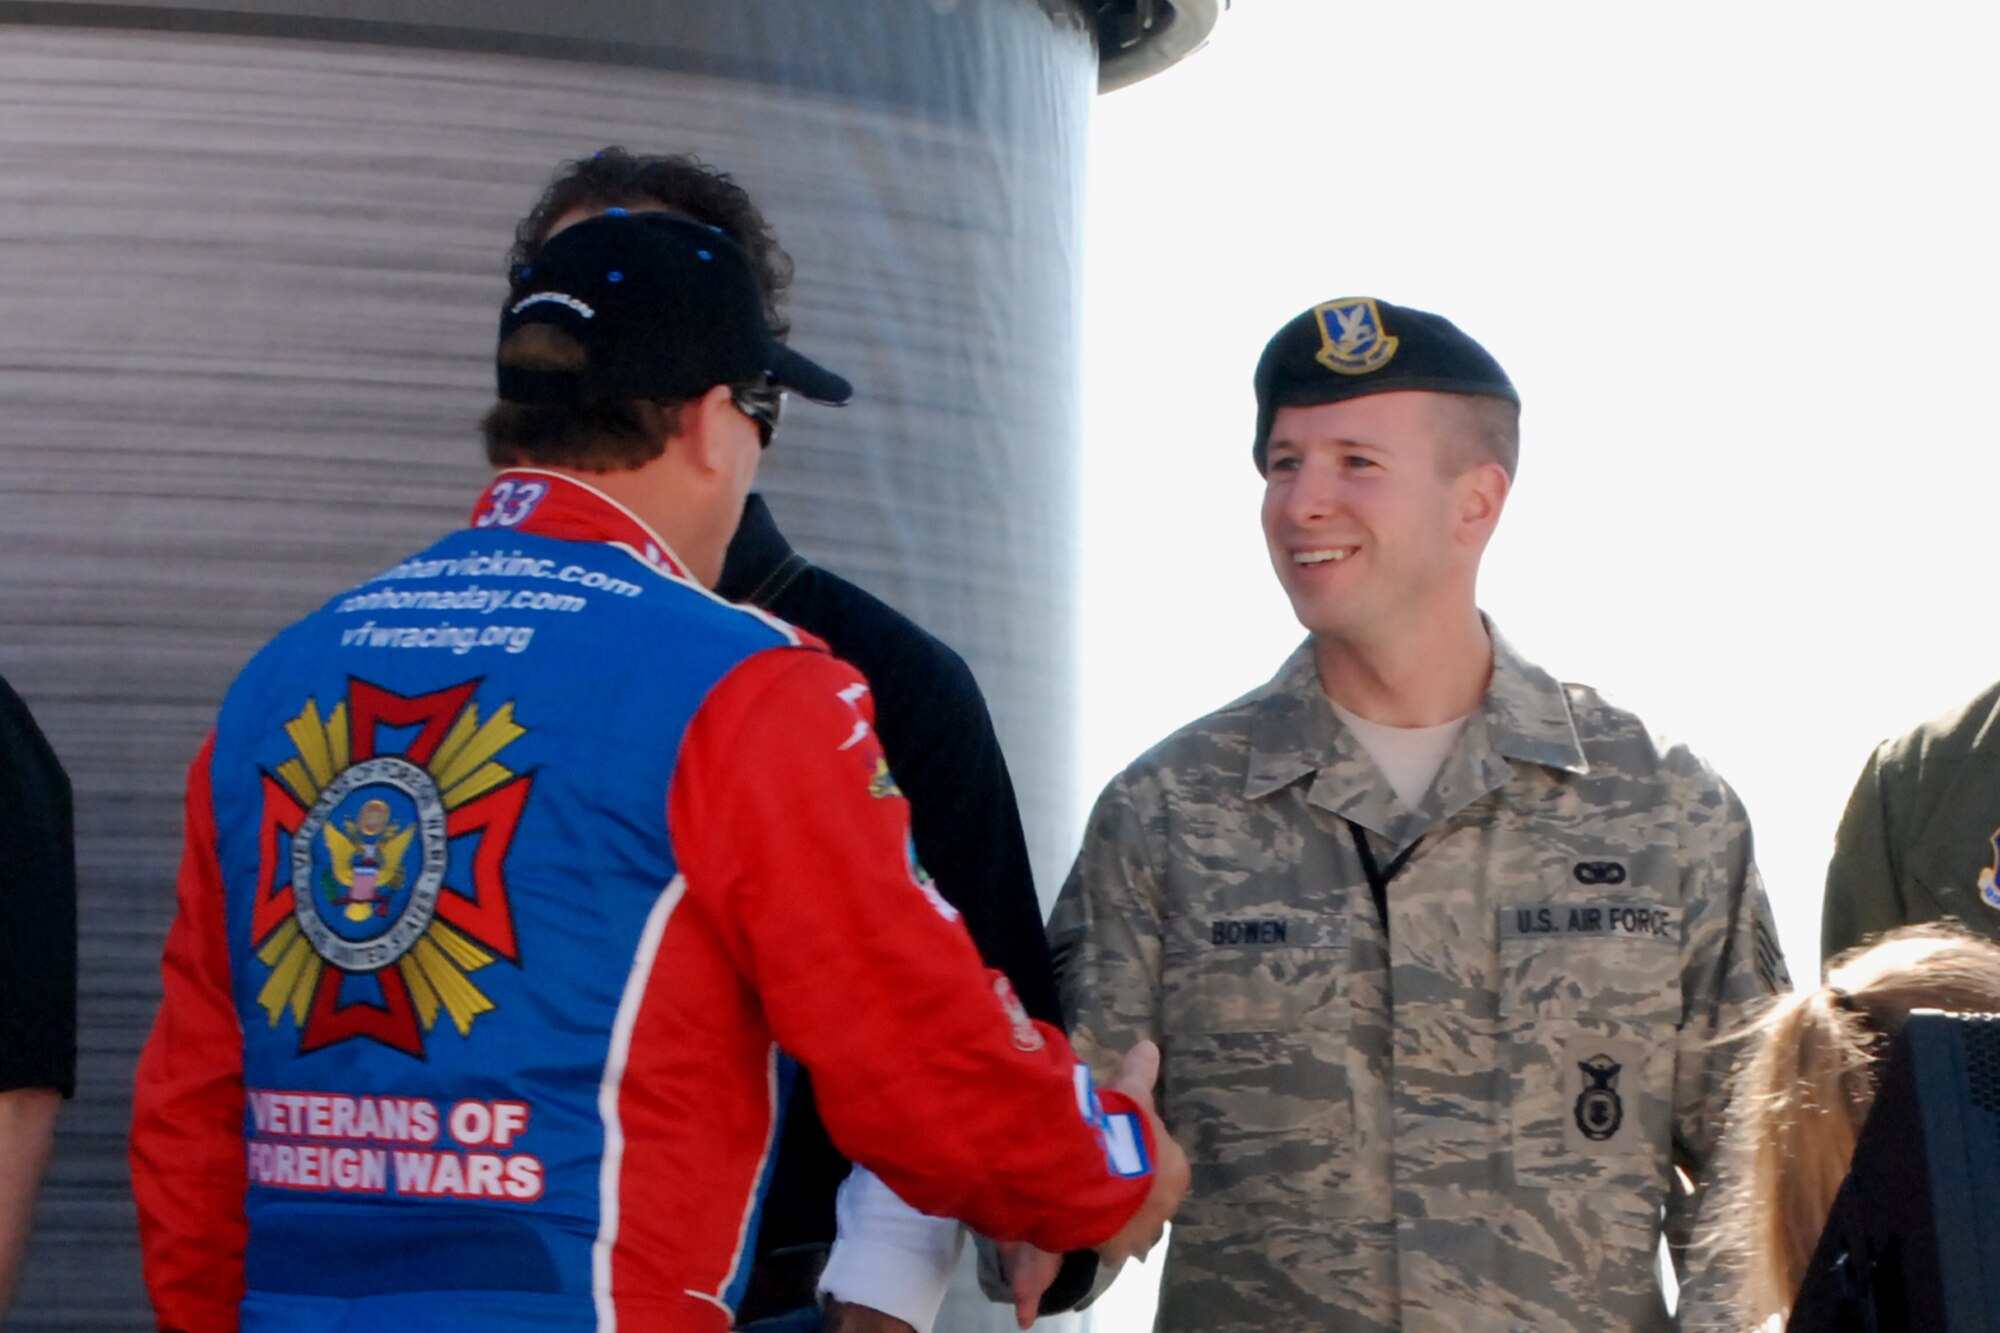 ATLANTA MOTOR SPEEDWAY, GA. - Staff Sgt. Edward Bowen shakes hands with Ron Hornaday, driver of the No. 33 Veterans of Foreign Wars NASCAR truck.  Sergeant Bowen attended Saturday?s race as a guest of the Atlanta Motor Speedway?s ?American Commercial Lines 200 NASCAR Camping World Truck Series race? event on, March 7.  (U.S. Air Force photo/Tech. Sgt. James Branch)